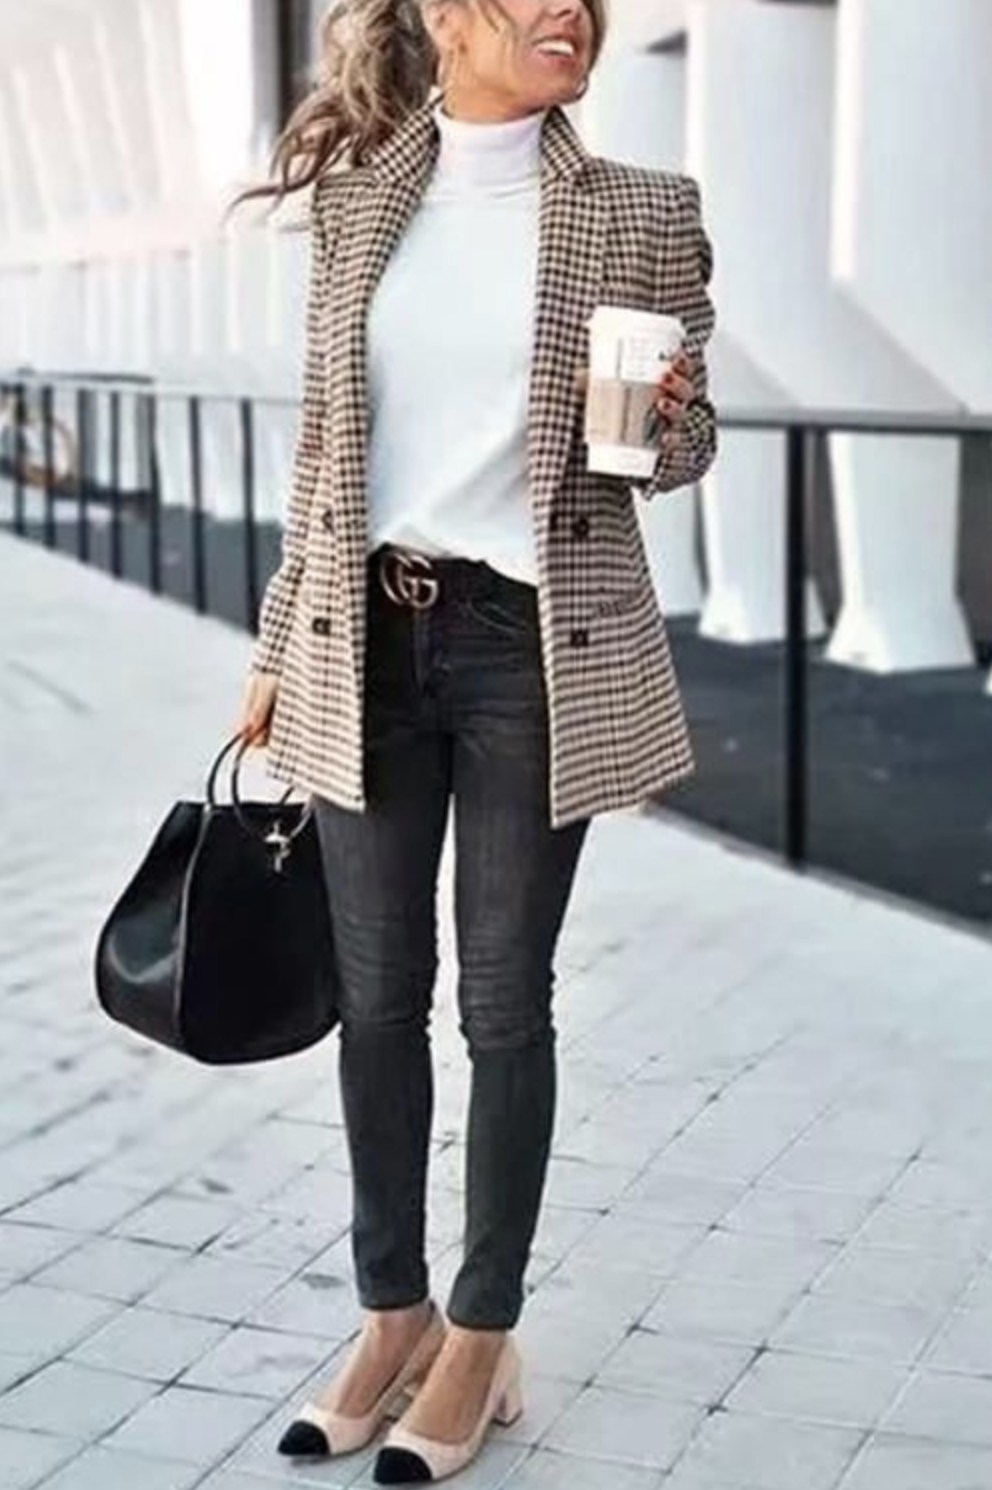 Best Labor Day Sales 2019 for Fall Clothing - An Unblurred Lady - Best Labor Day Sales 2019 for Fall Clothing - An Unblurred Lady -   17 style 2019 women ideas